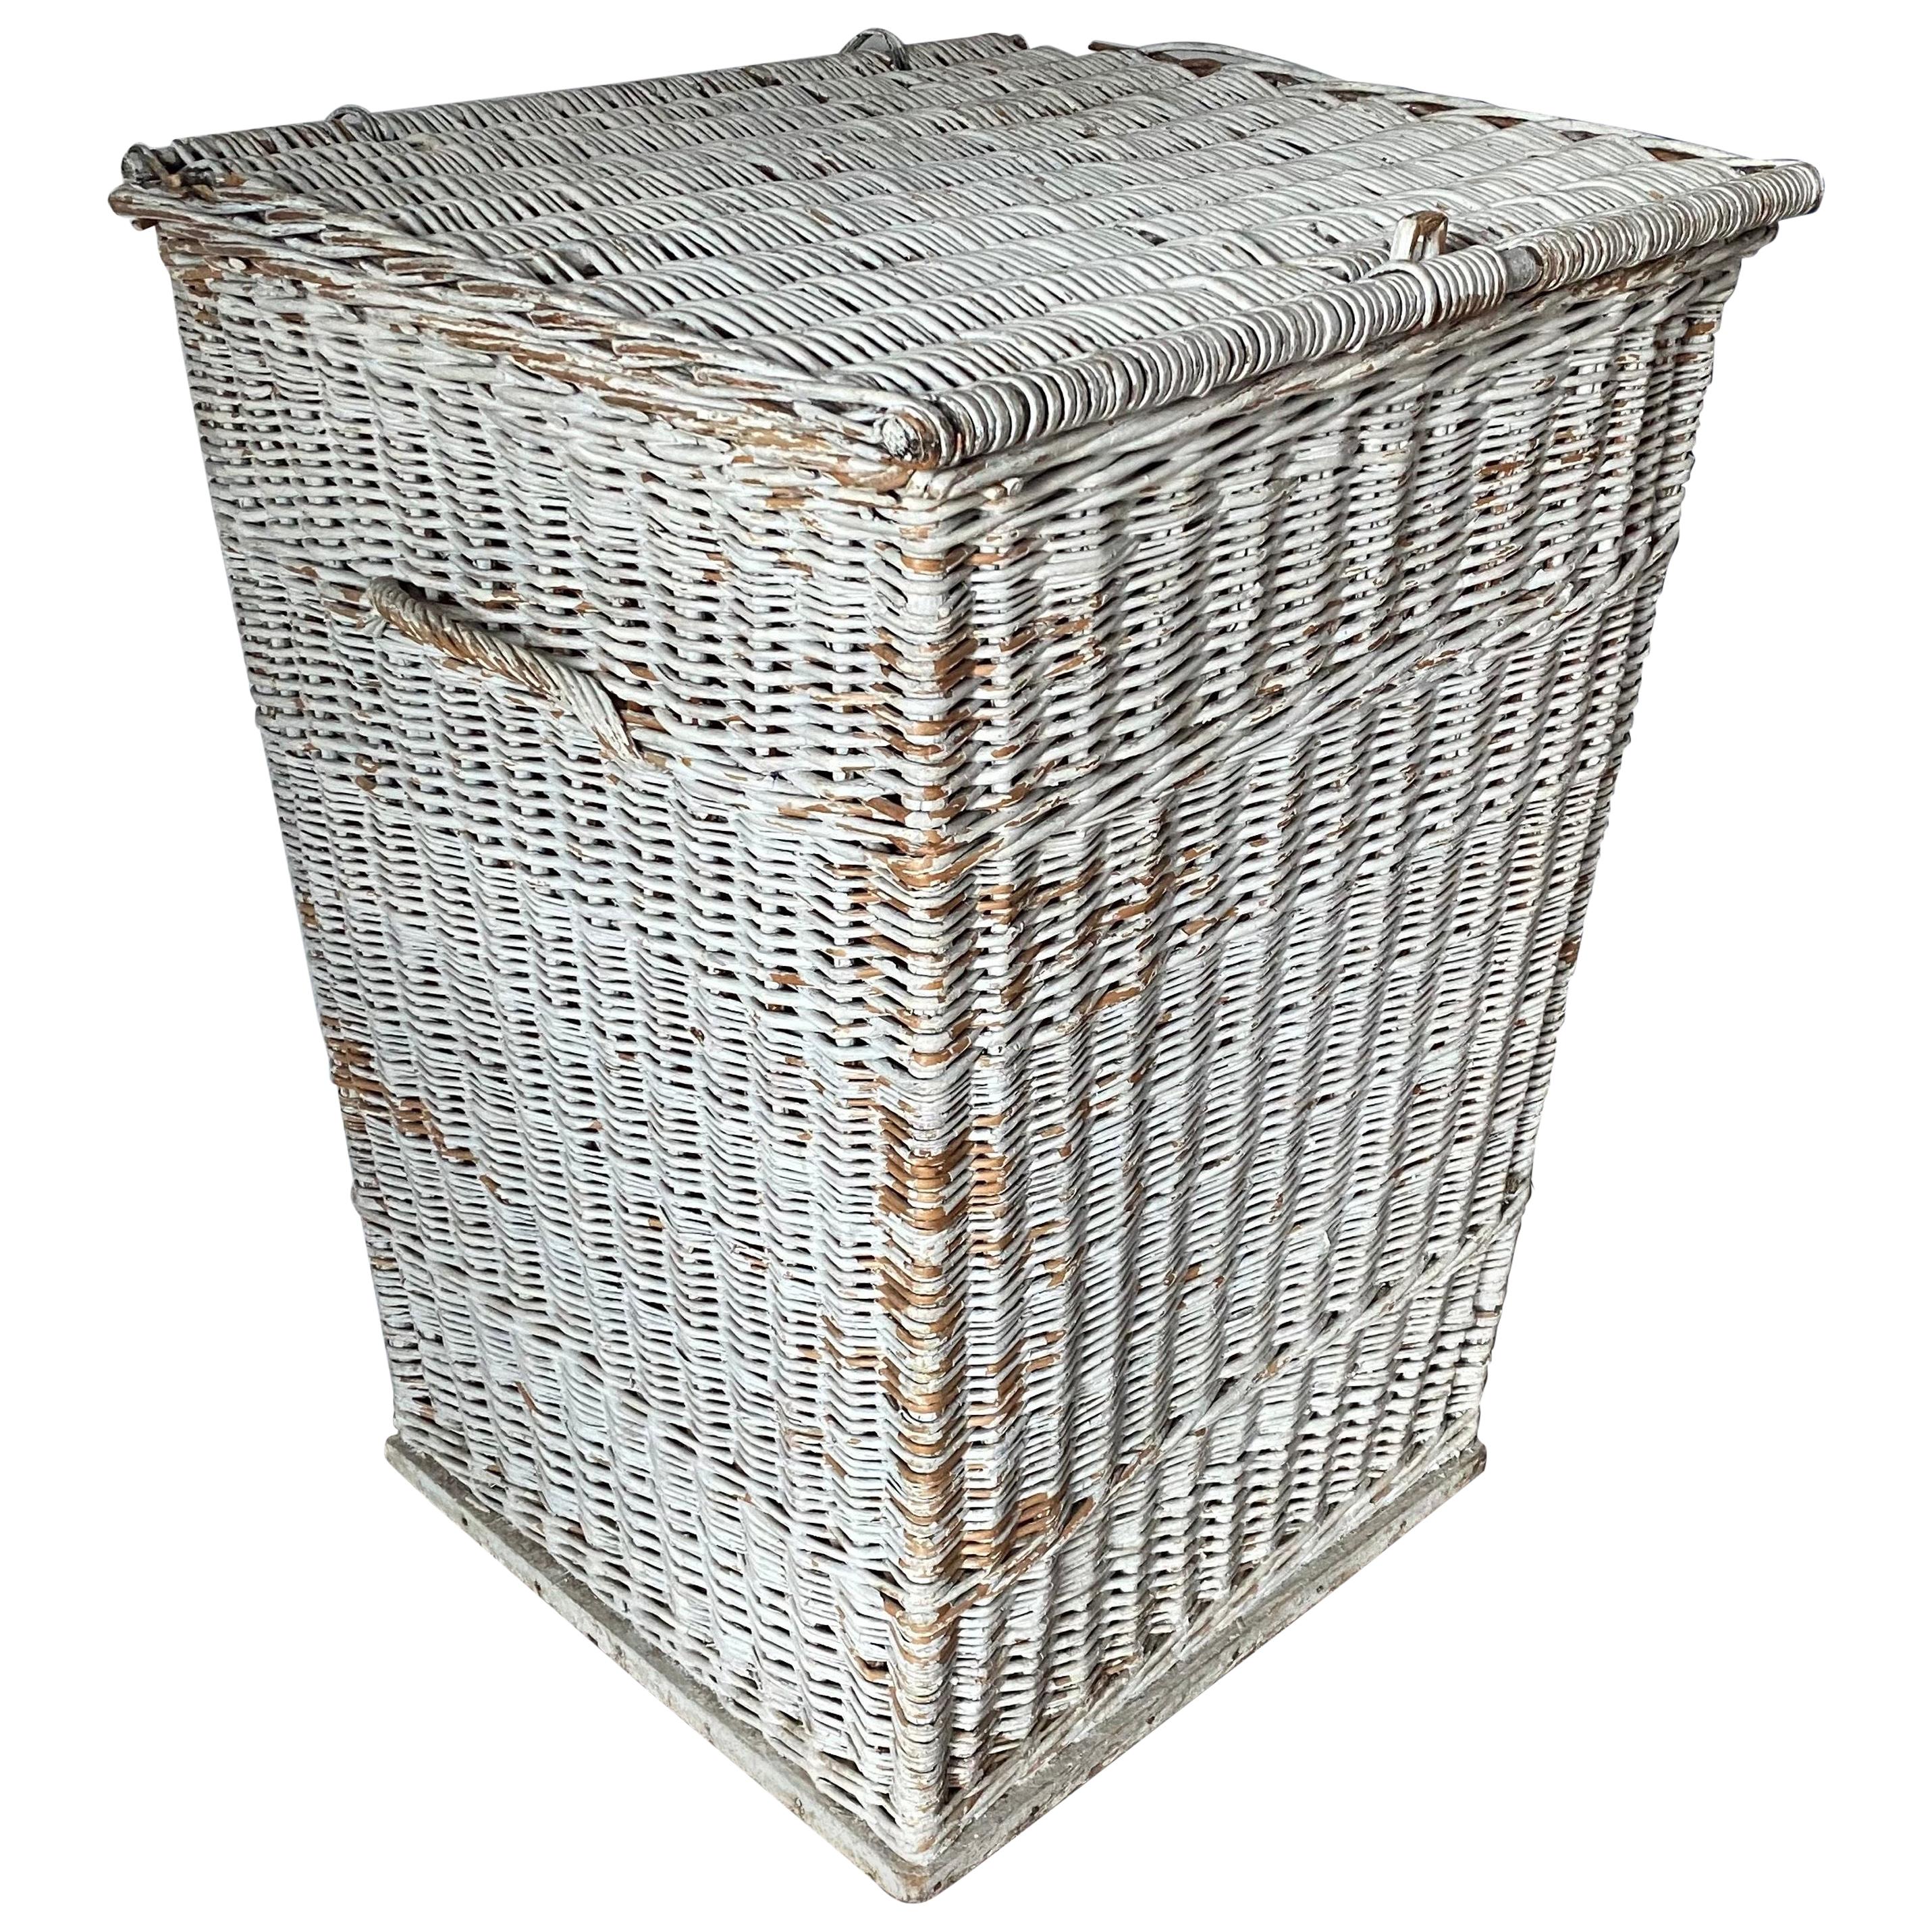 Large Rustic Wicker Basket For Sale at 1stDibs